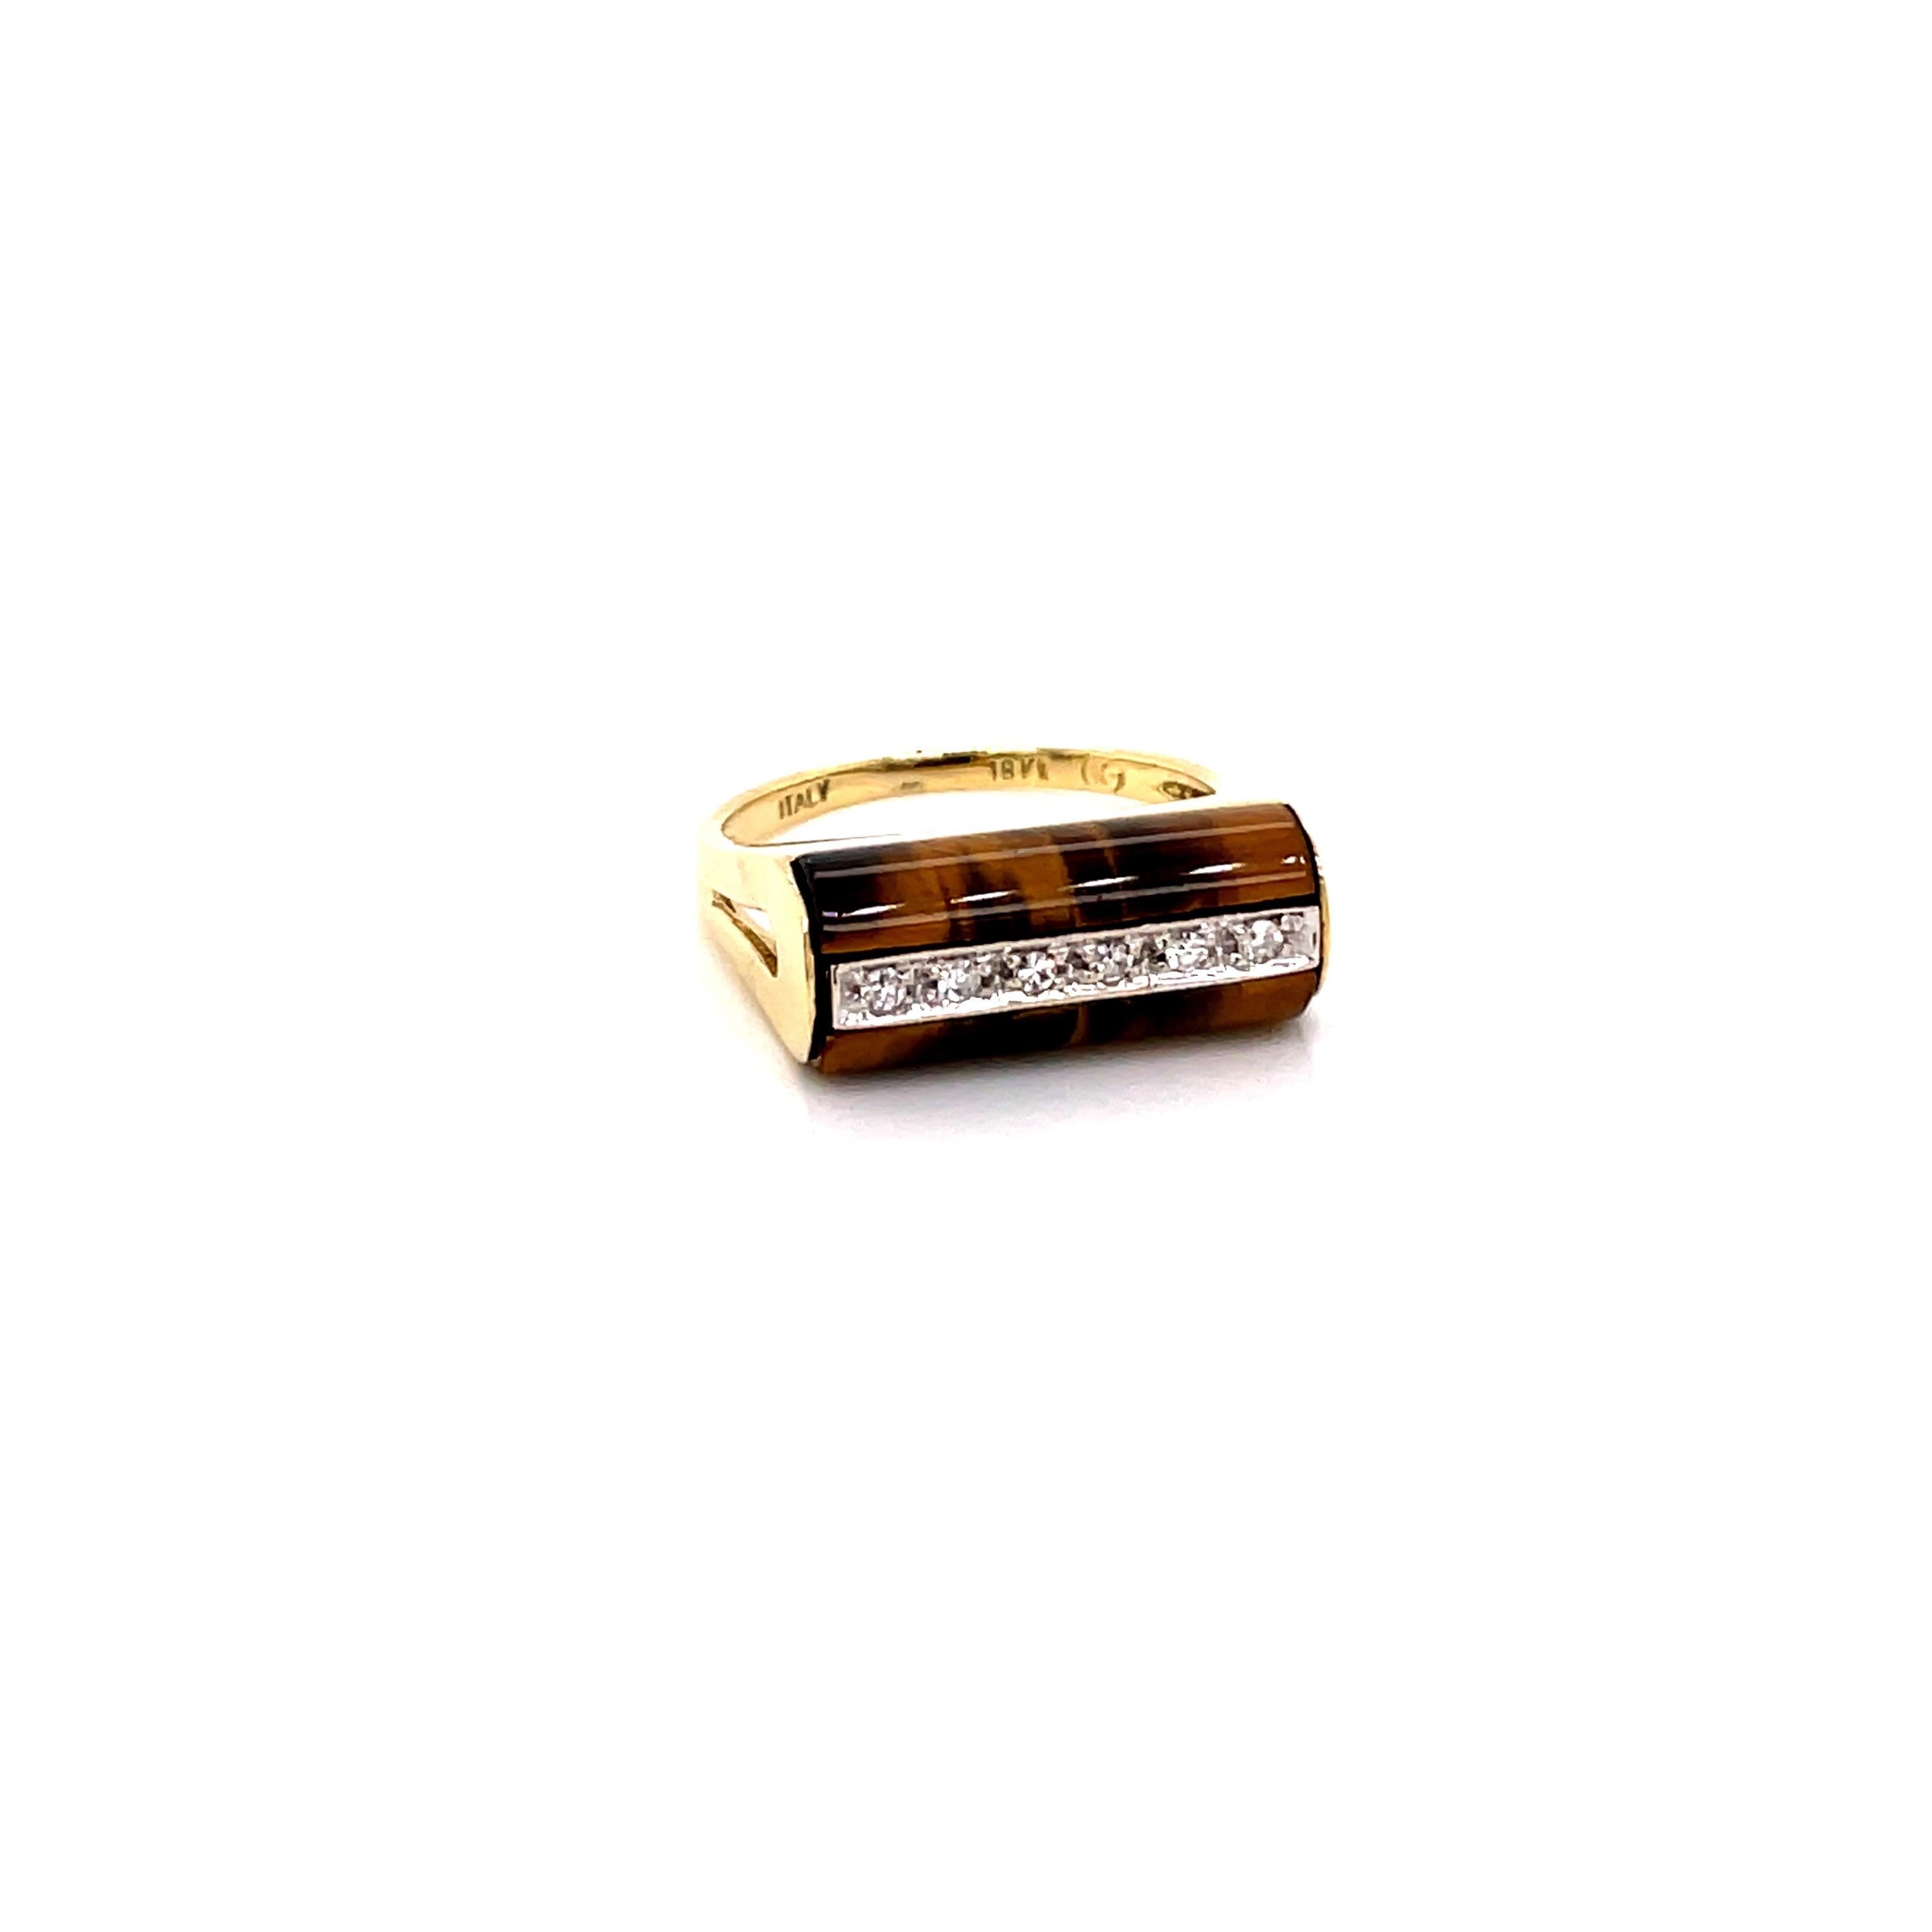 Vintage 18K Yellow Gold Tiger’s Eye and Diamond Ring - The ring is set with 6 single cut diamonds weighing approximately .06ct with H color and VS clarity. The top of the ring measures 17mm by 7mm, and the height off the finger is 5.3mm. The ring is